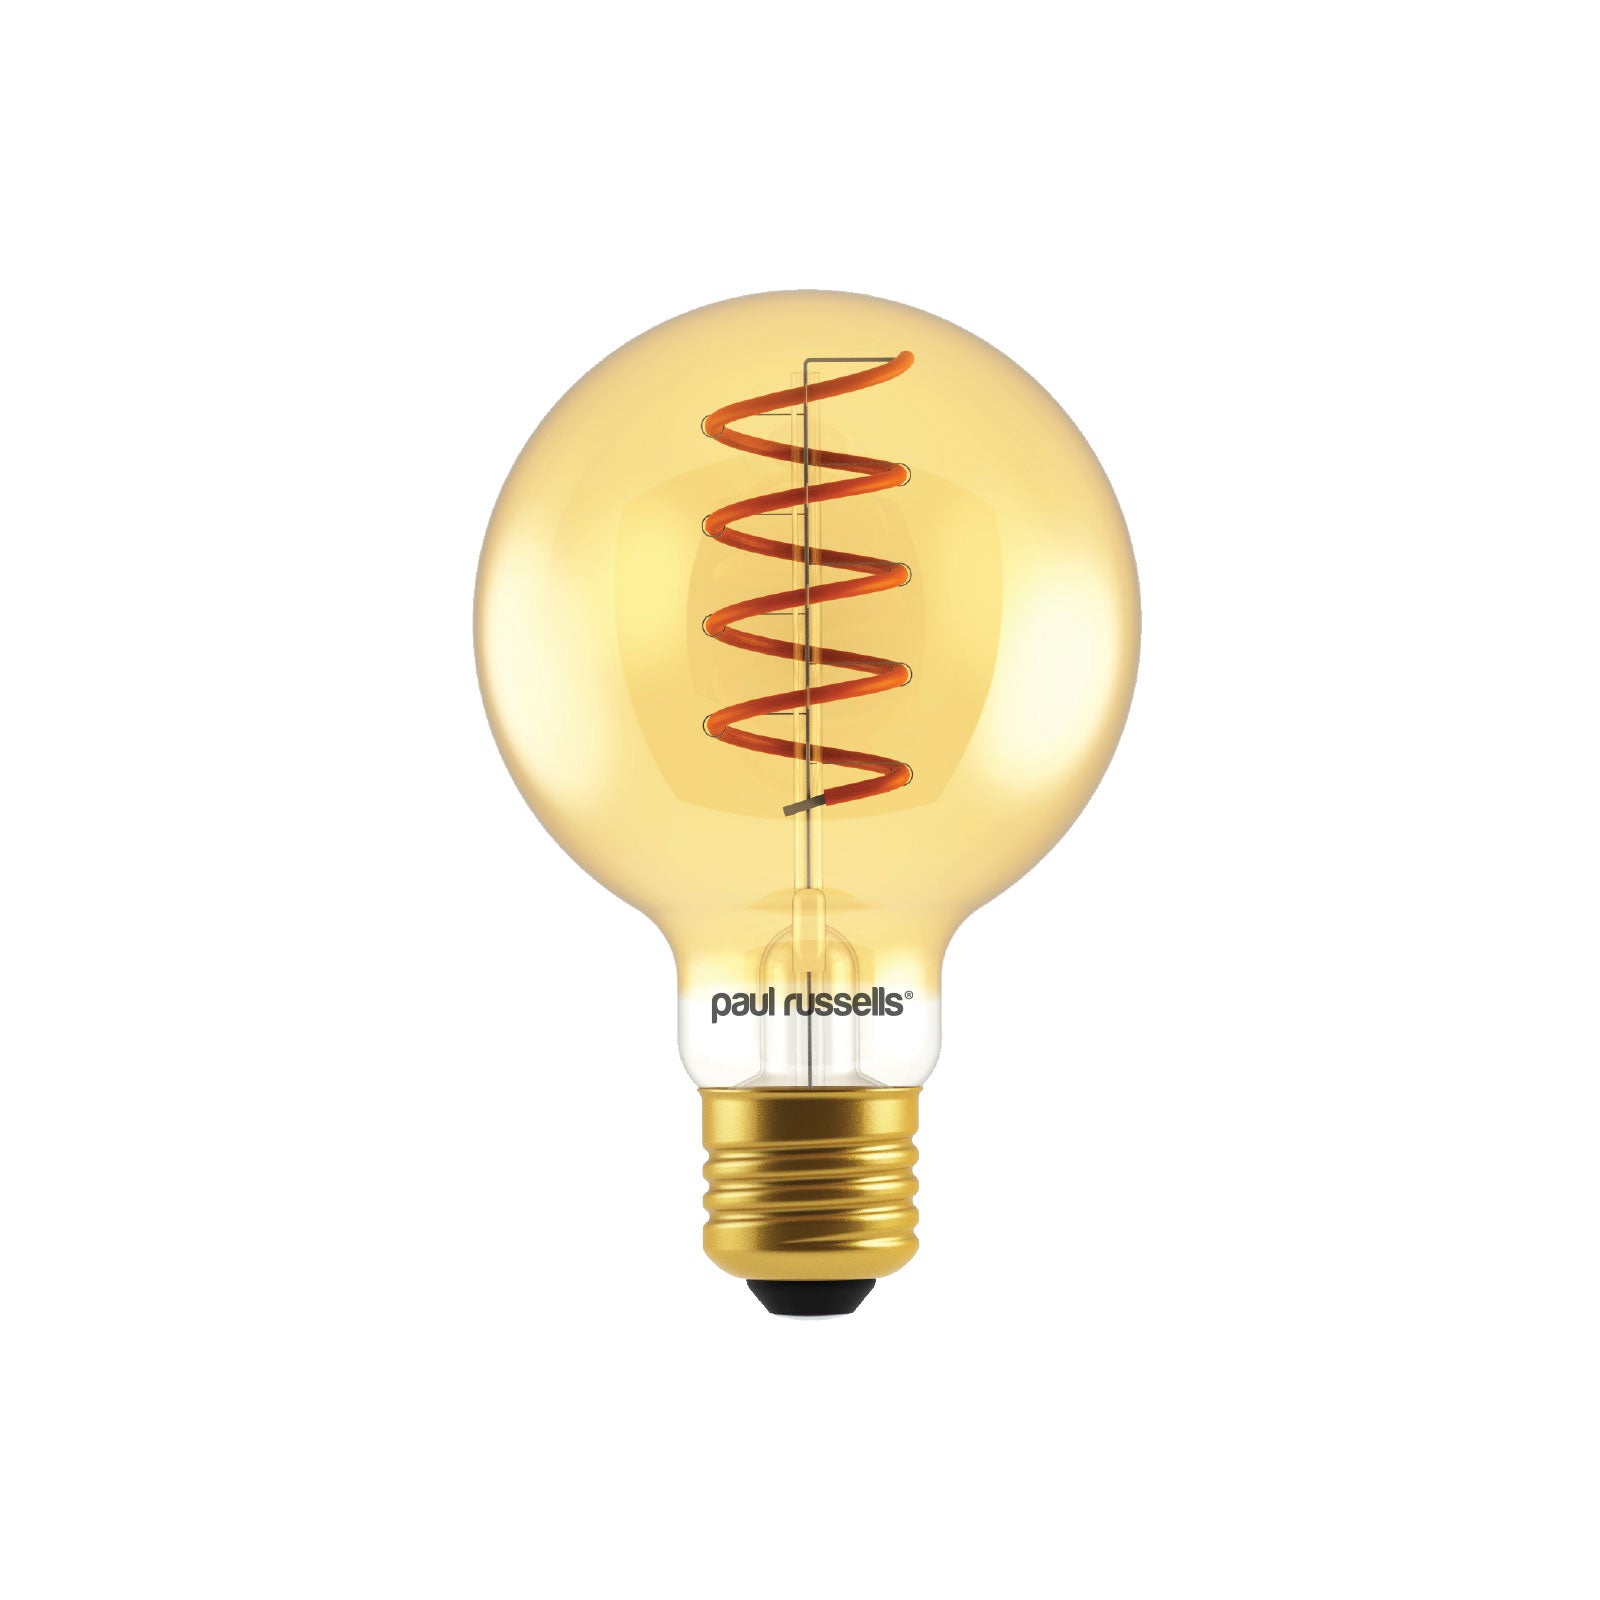 LED Filament E27 White G80 Edison ES Extra Warm paul russells (AMBER) – 4W=25w Spiral